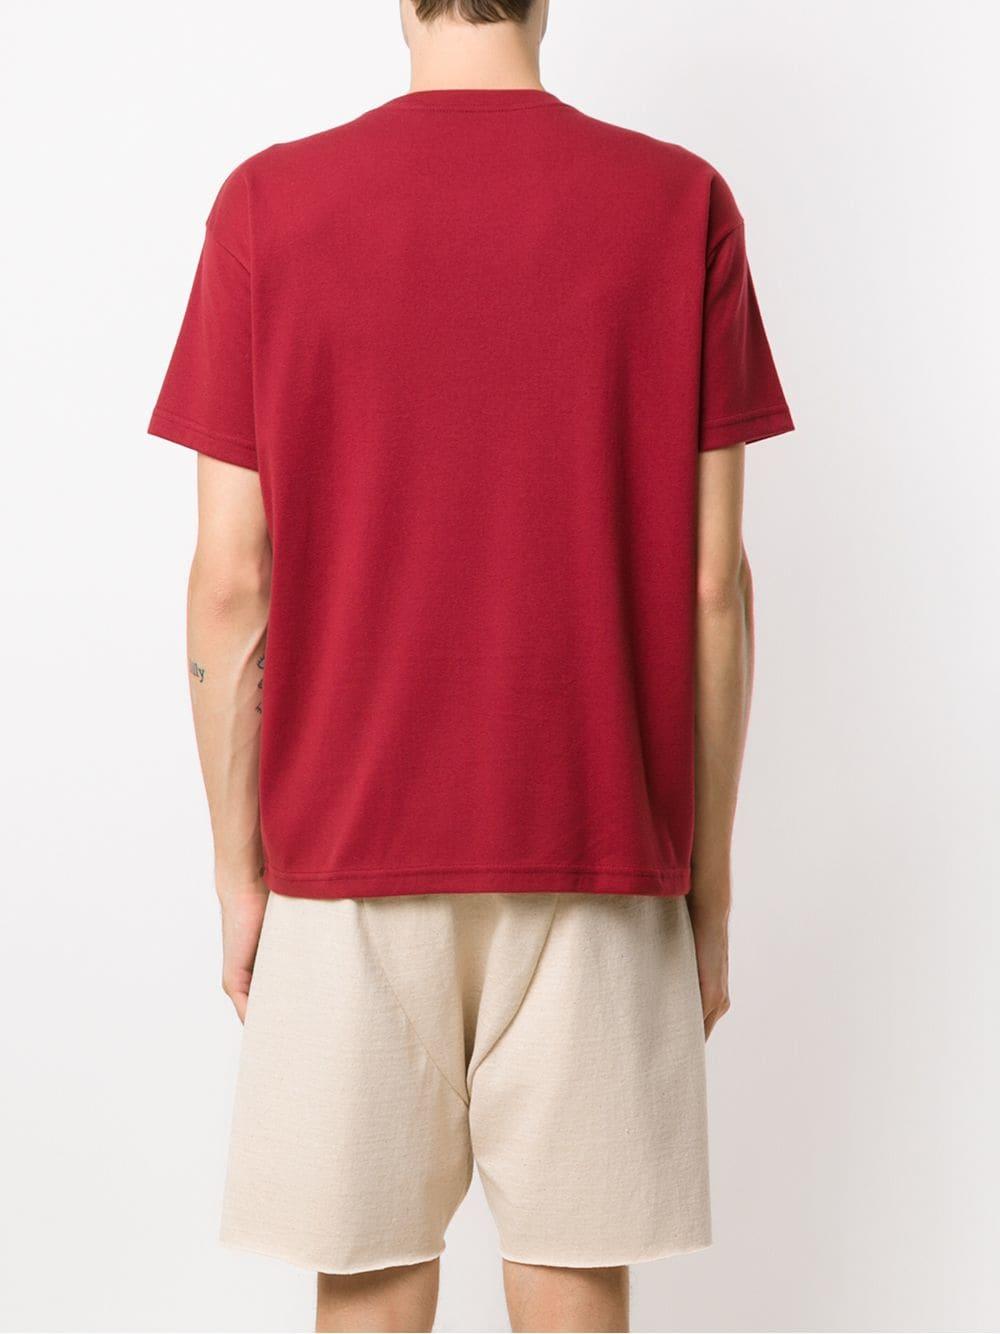 Osklen Cotton Printed T-shirt in Red for Men - Lyst